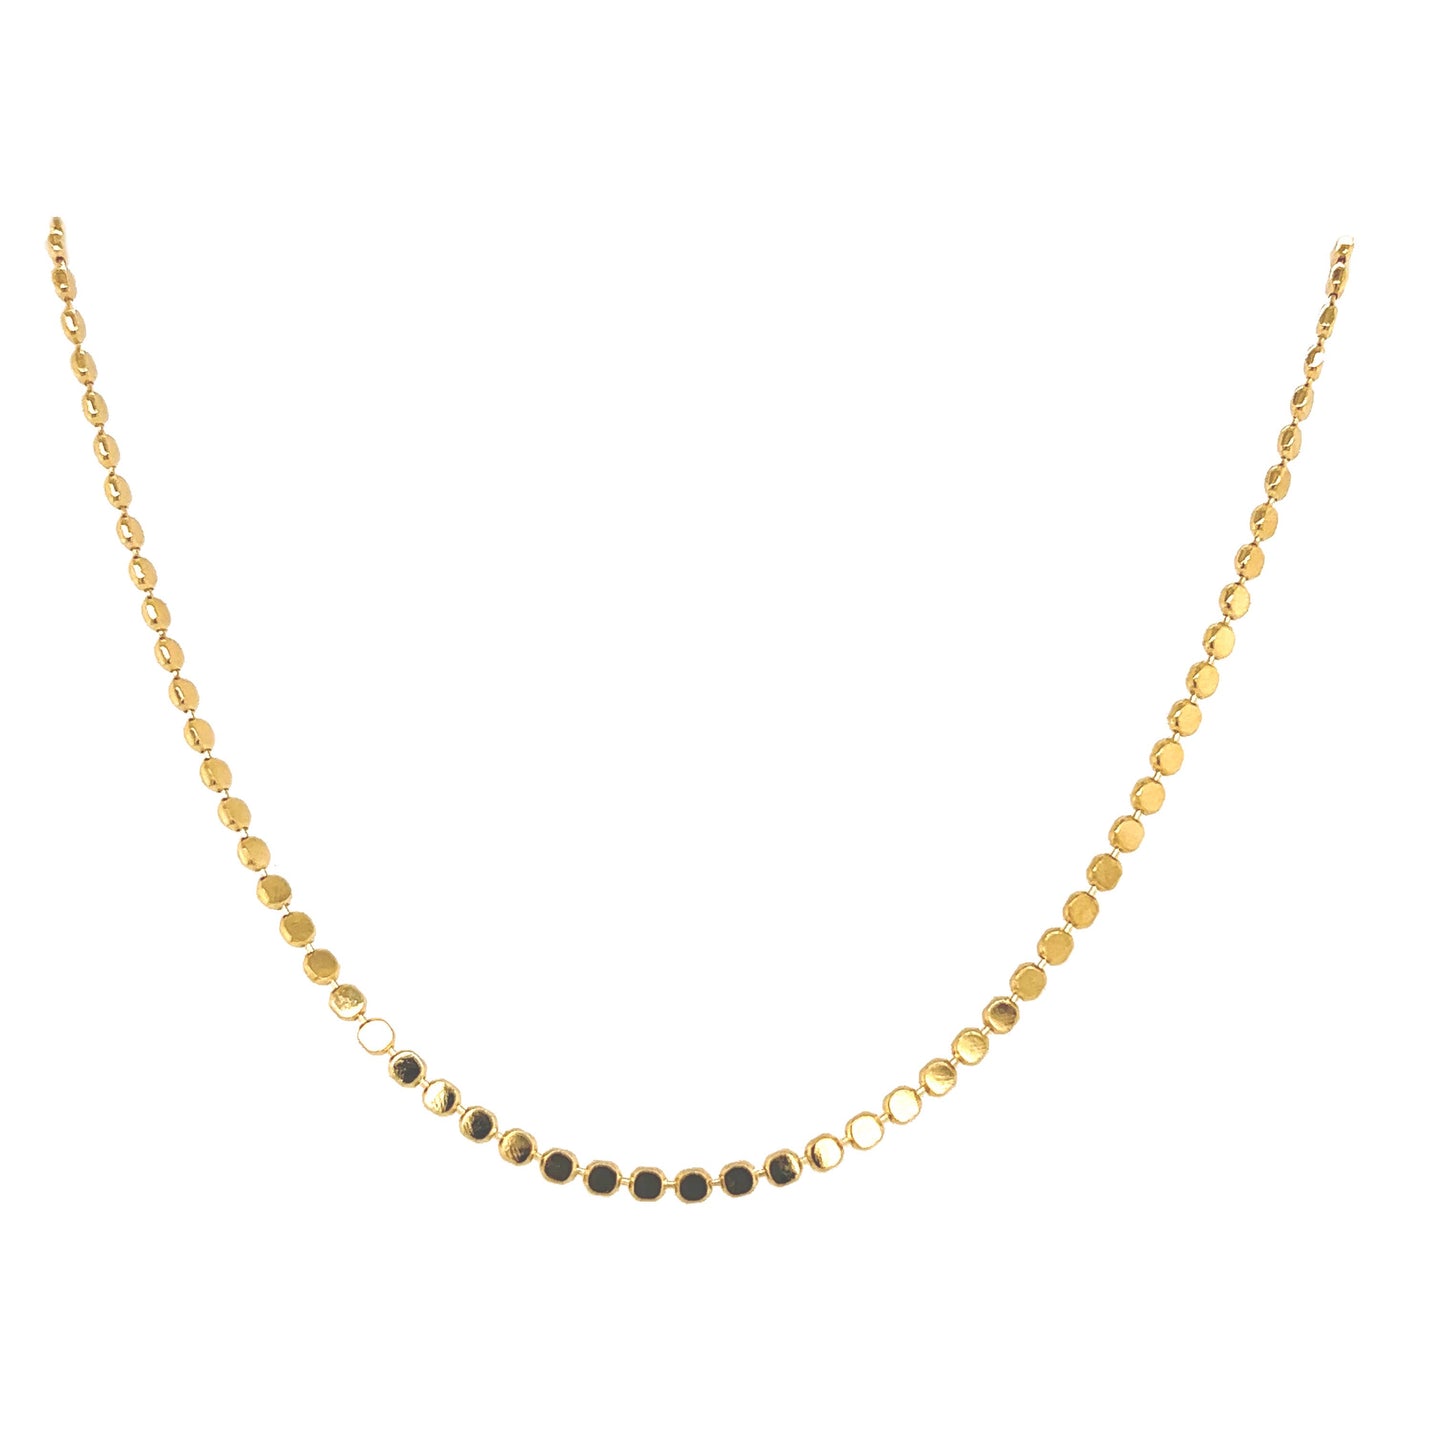 Dainty Gold Filled Flat Ball Necklace Chain: 16"